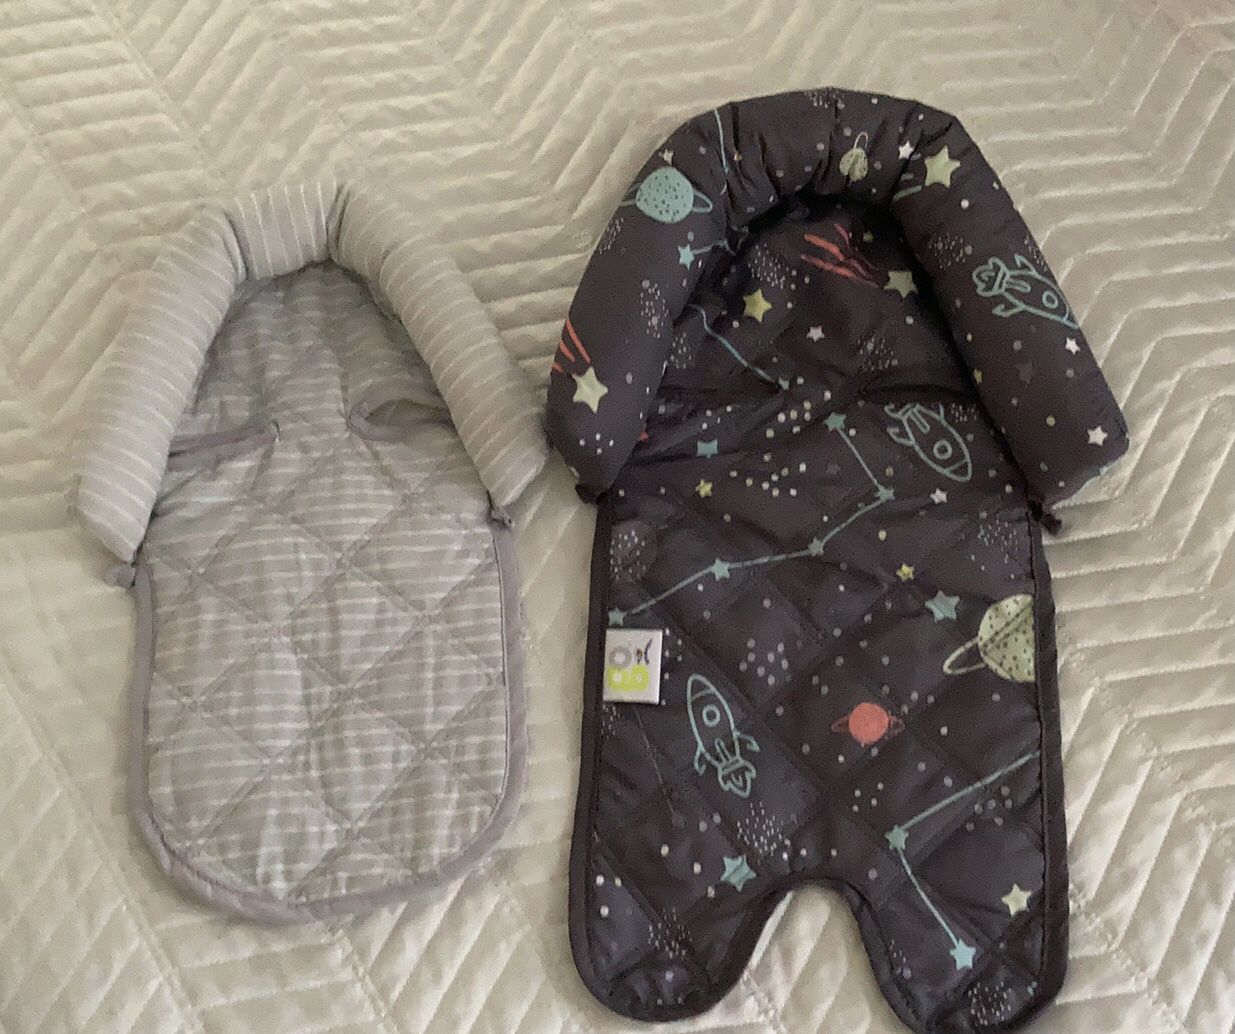 Newborn Head Support For Car Seat ,stroller Or Bouncer Both $6